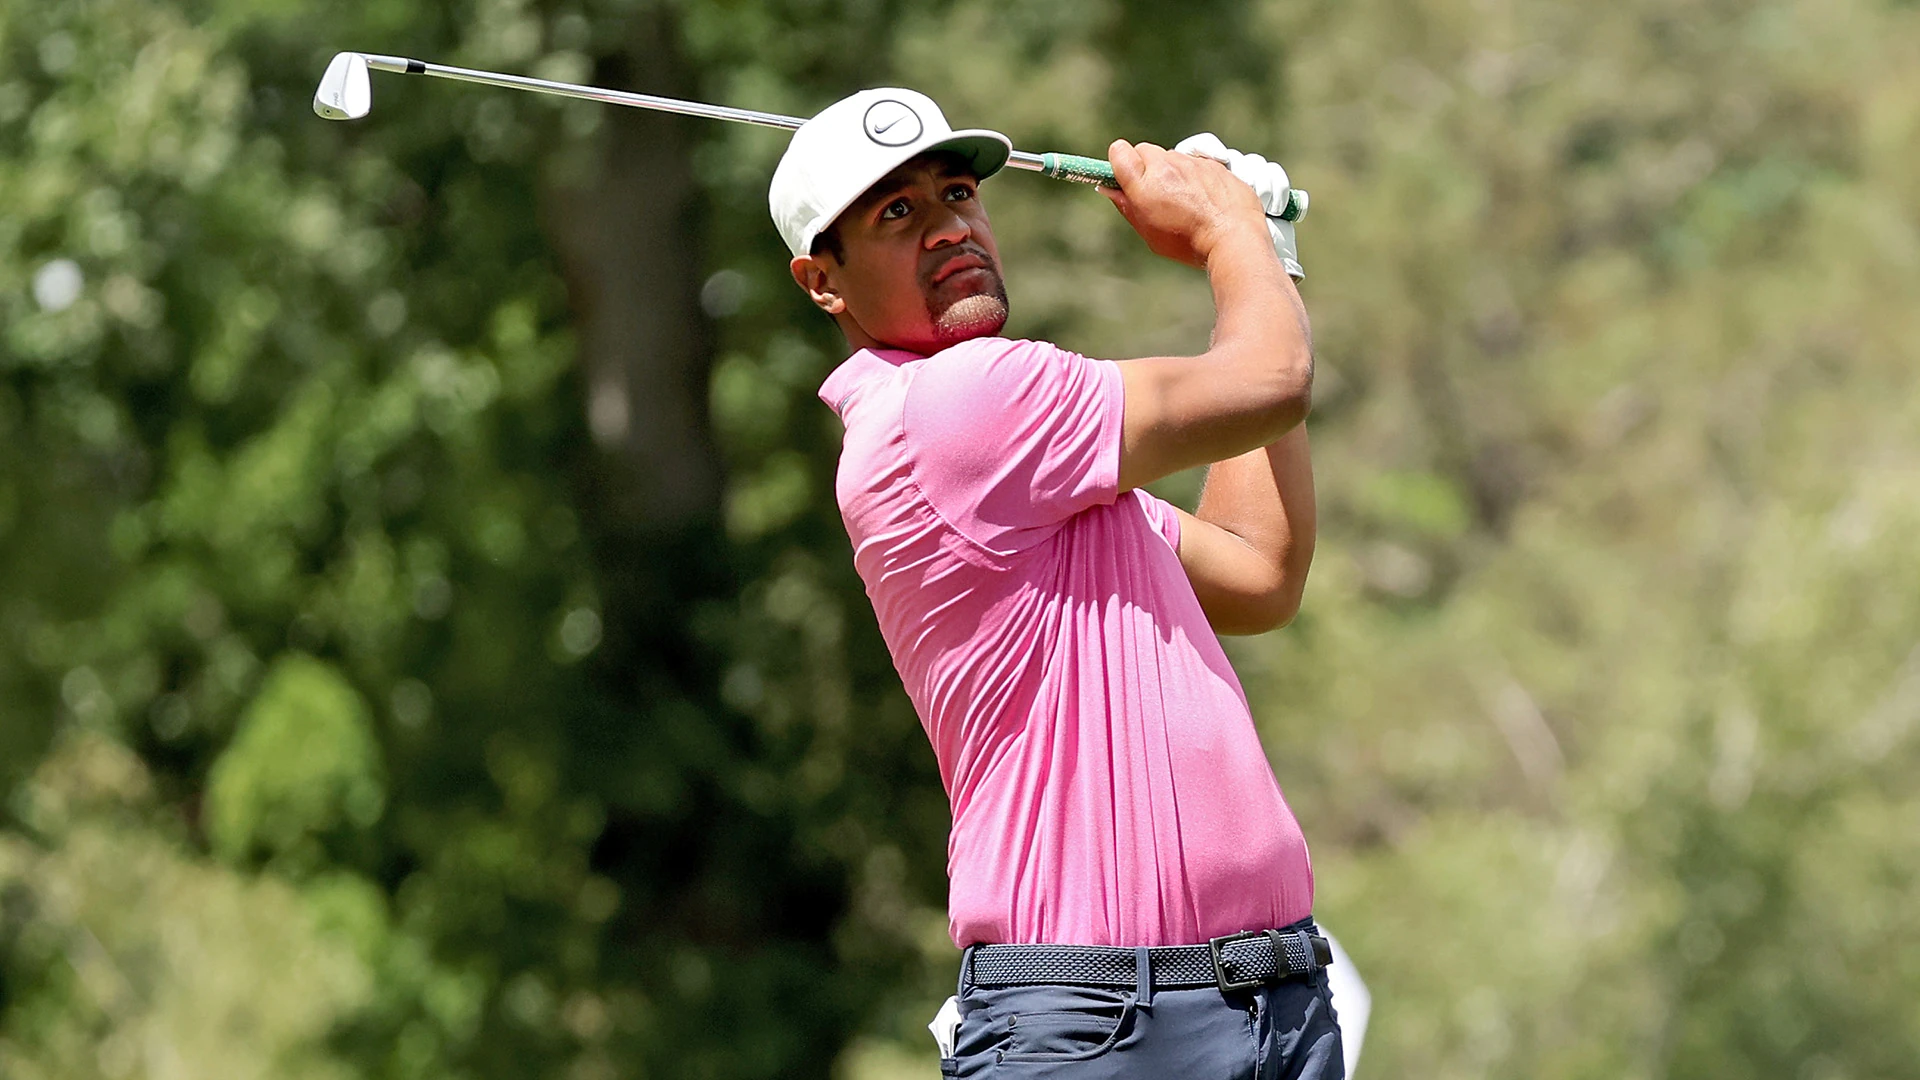 Tony Finau nearly shoots 57 on 8,100-yard course in ‘video game’ round